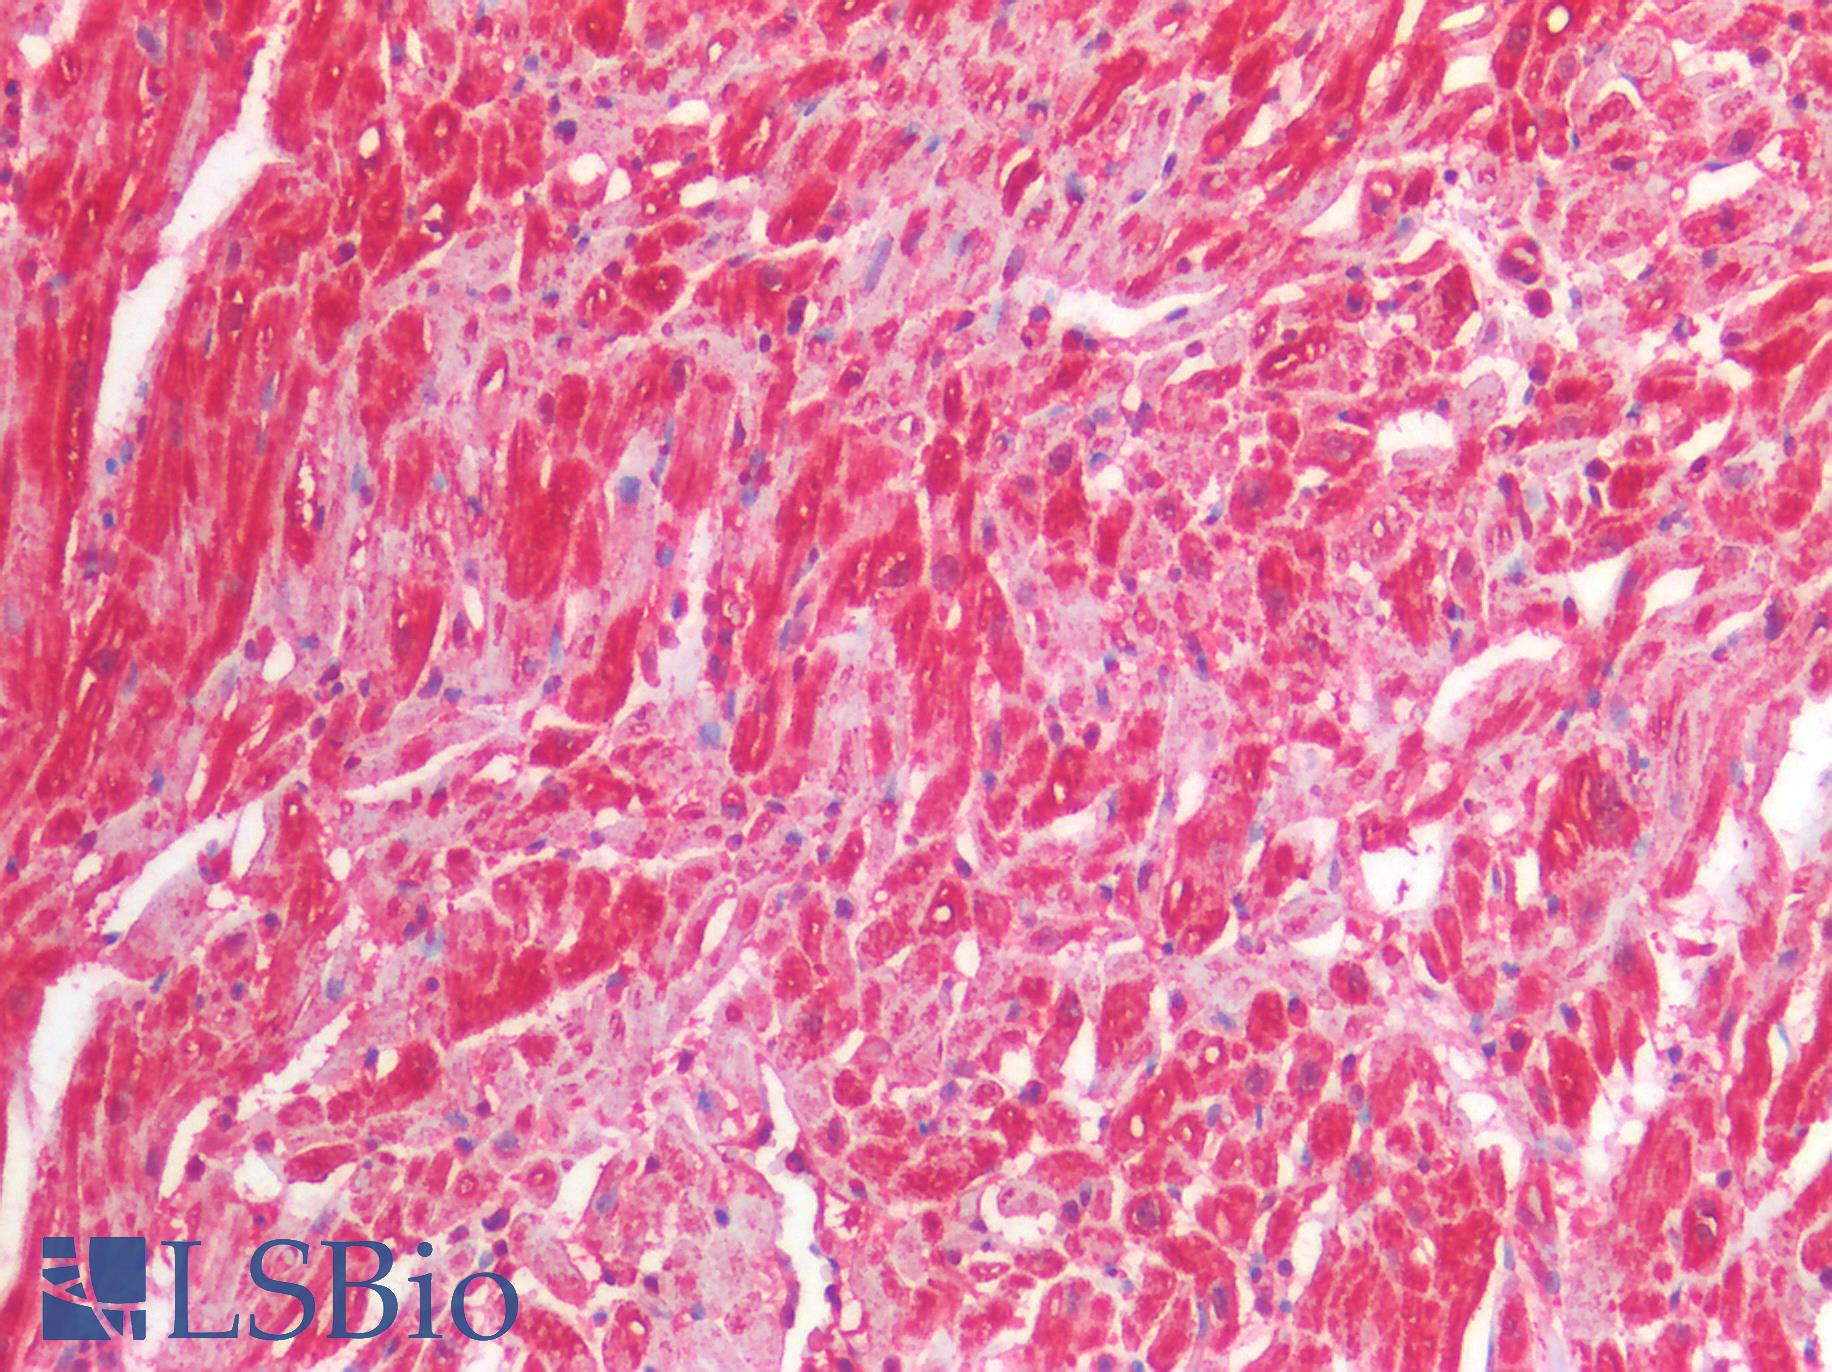 IL25 / IL17E Antibody - Human Heart: Formalin-Fixed, Paraffin-Embedded (FFPE)